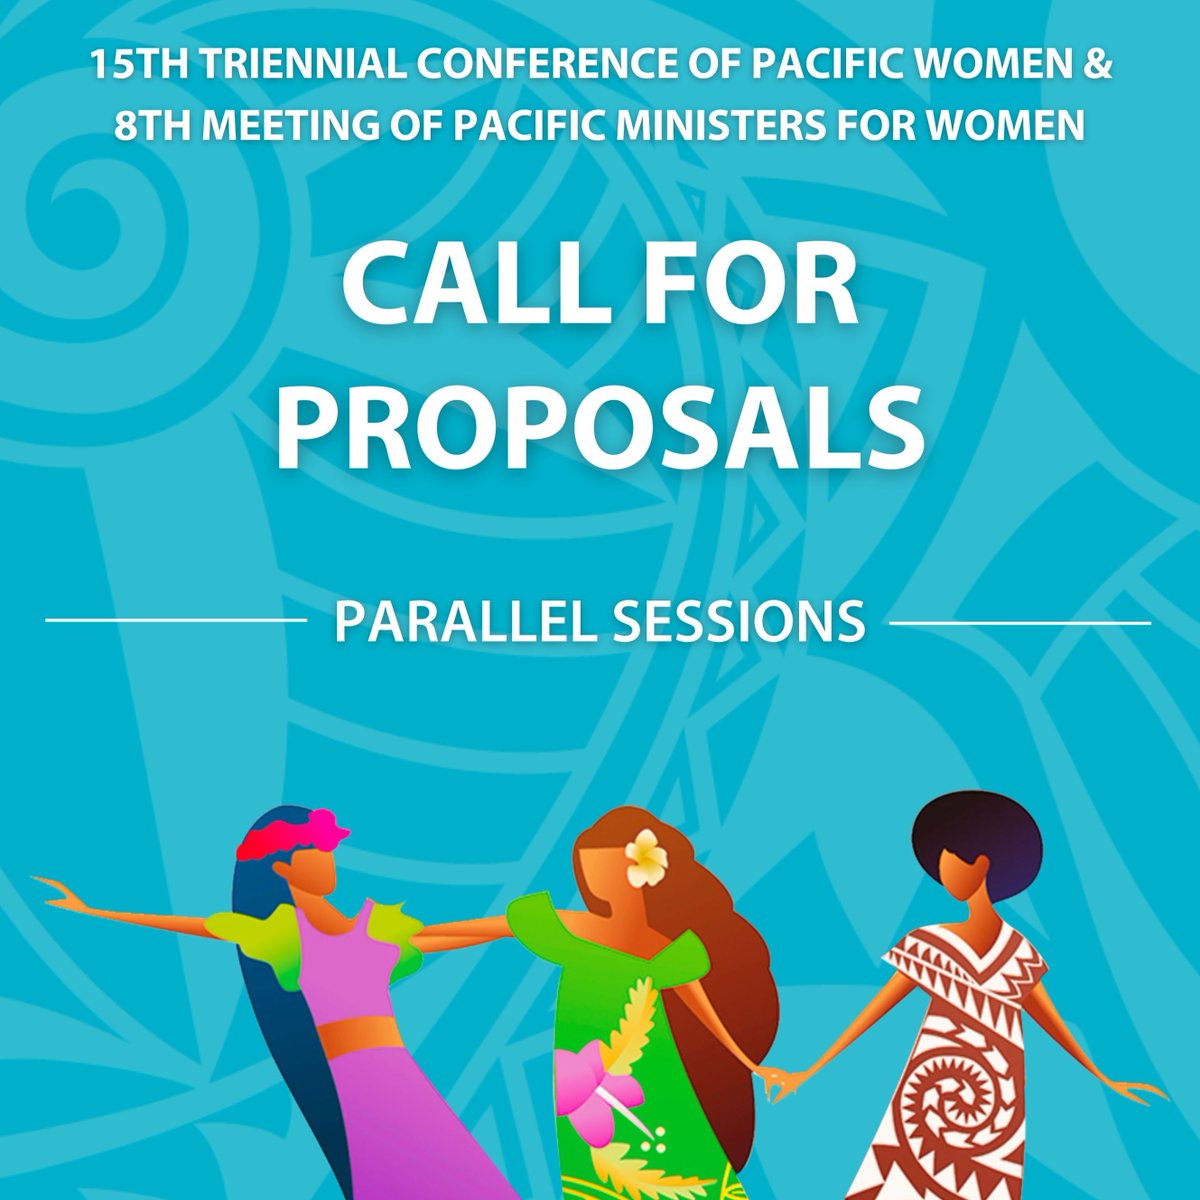 #PacificPeoples l Opportunity Alert ⚠️ We invite organisations and individuals to submit proposals for official parallel sessions at the 15th Triennial Conference of Pacific Women. Submit your proposal today! For more details, click: bit.ly/3VcYTja